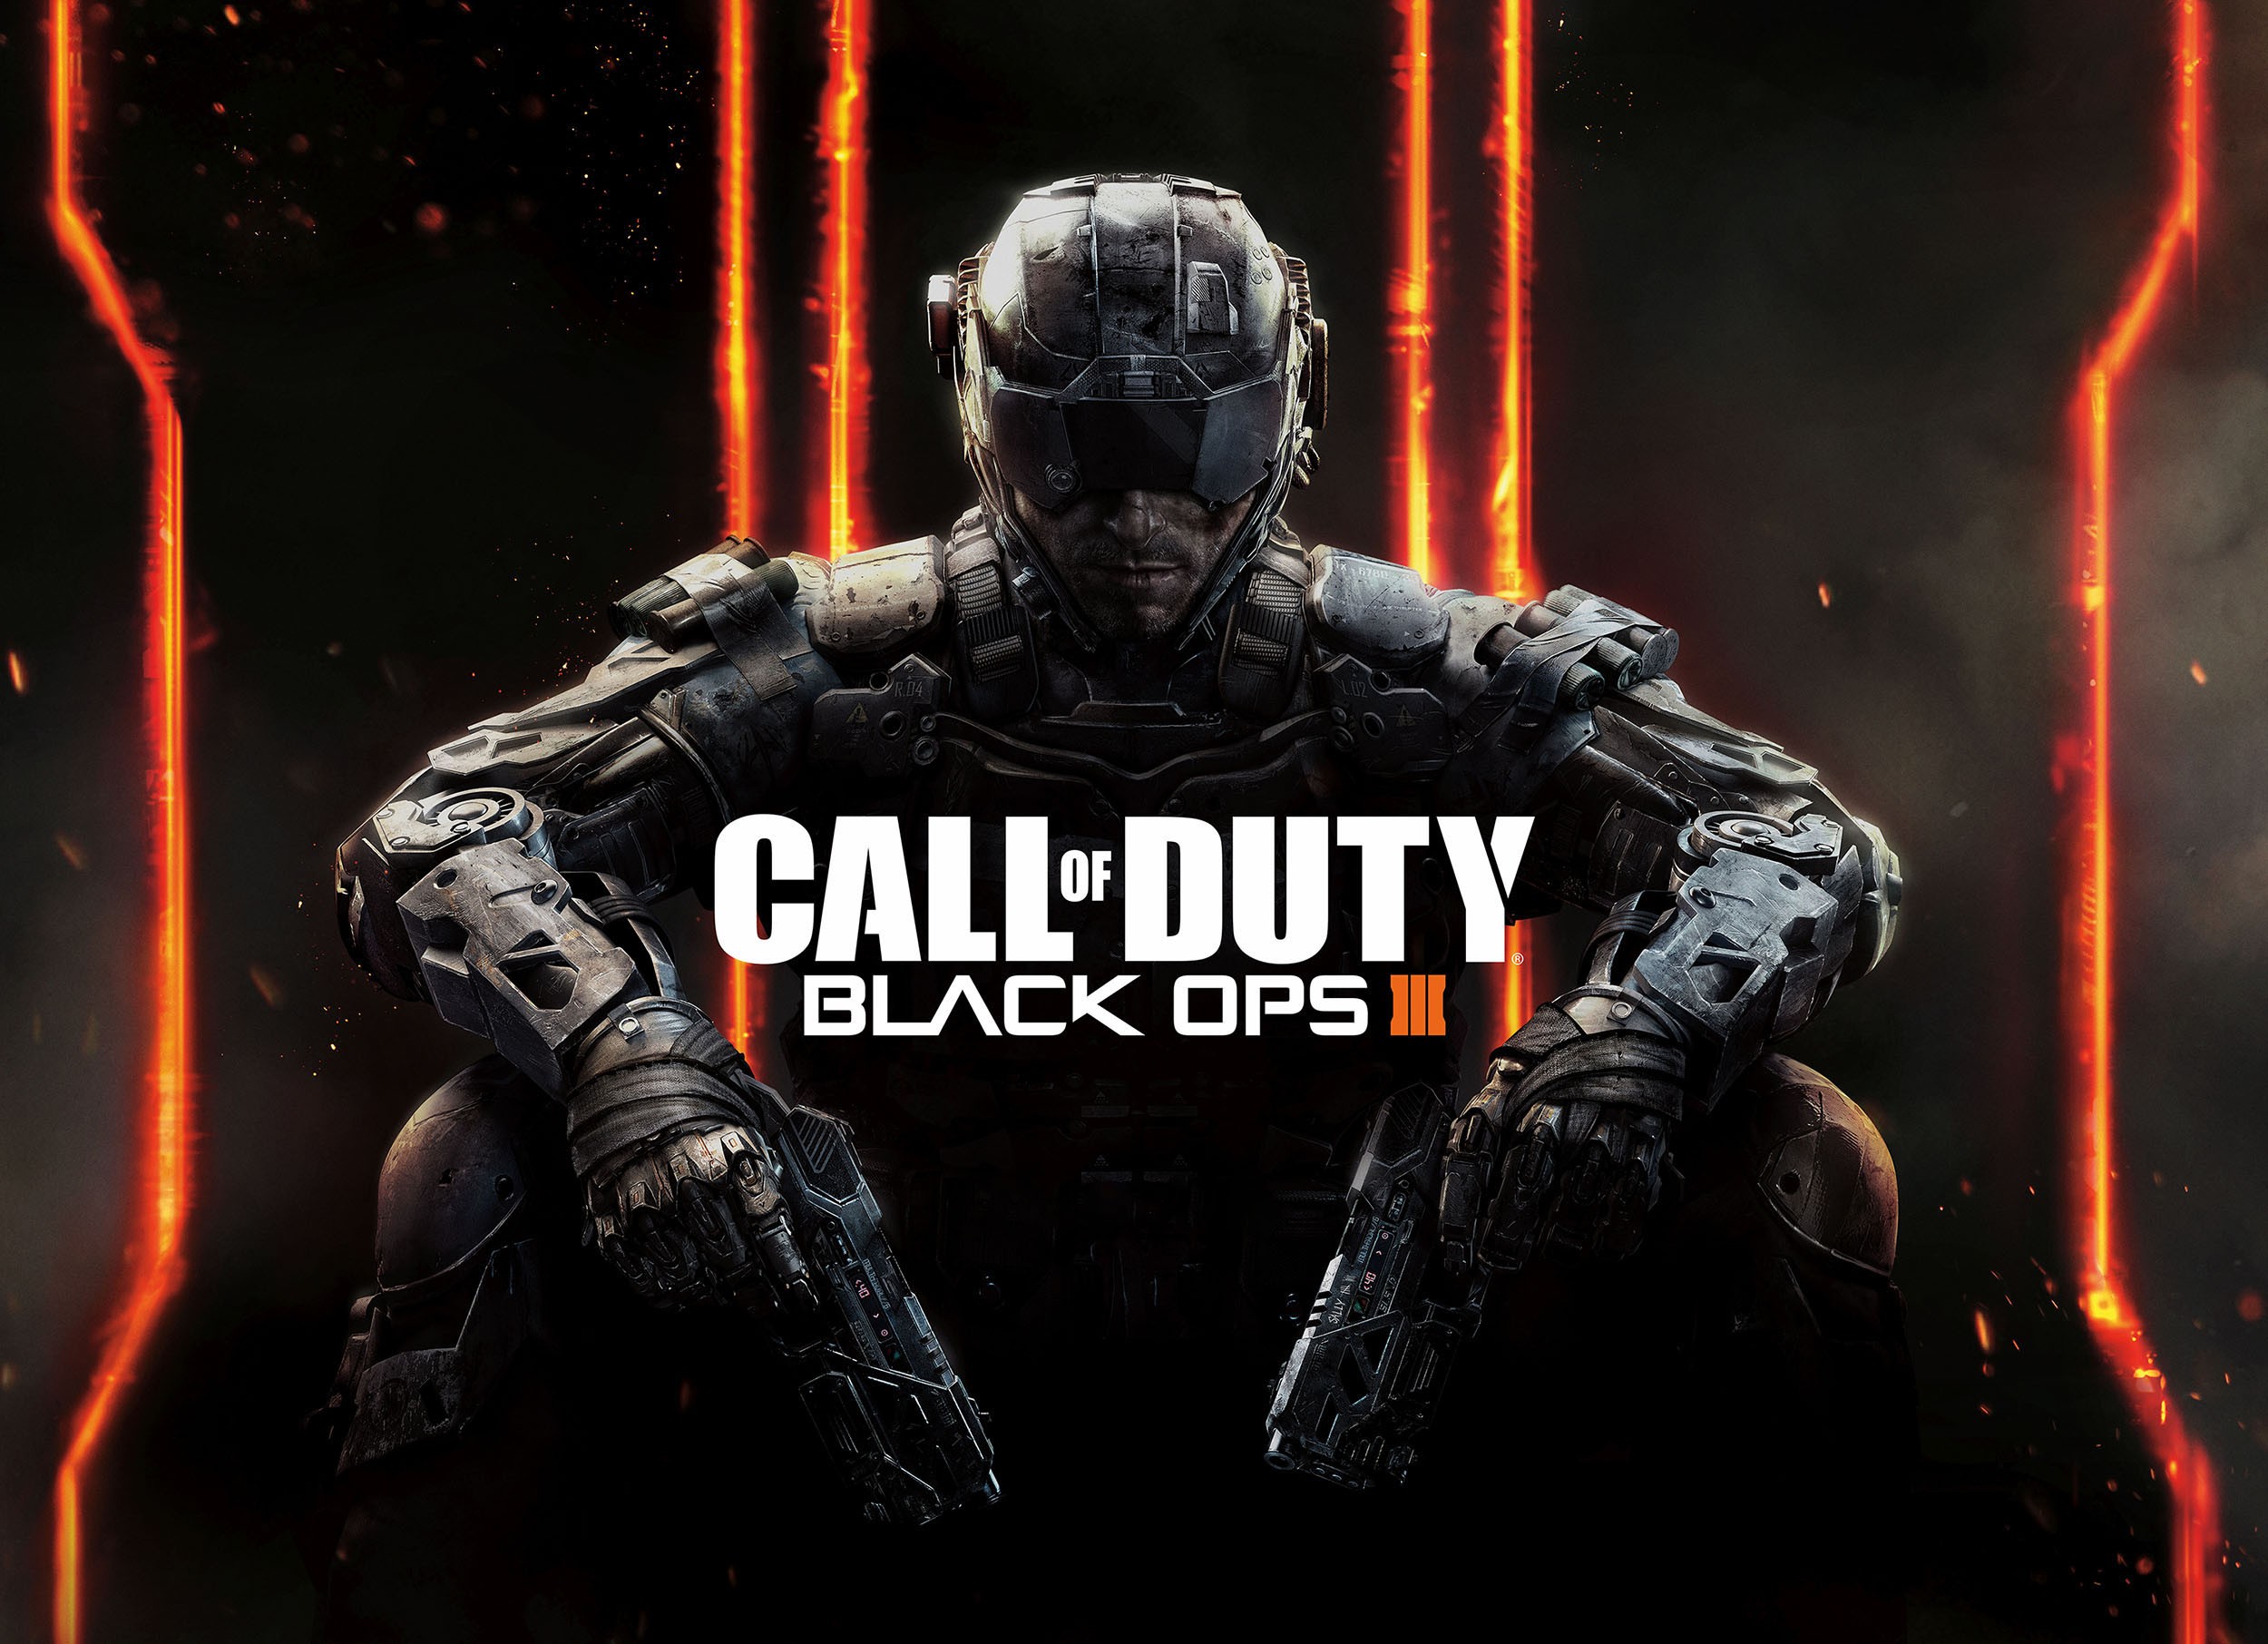 Download directx call of duty black ops 2 to fix